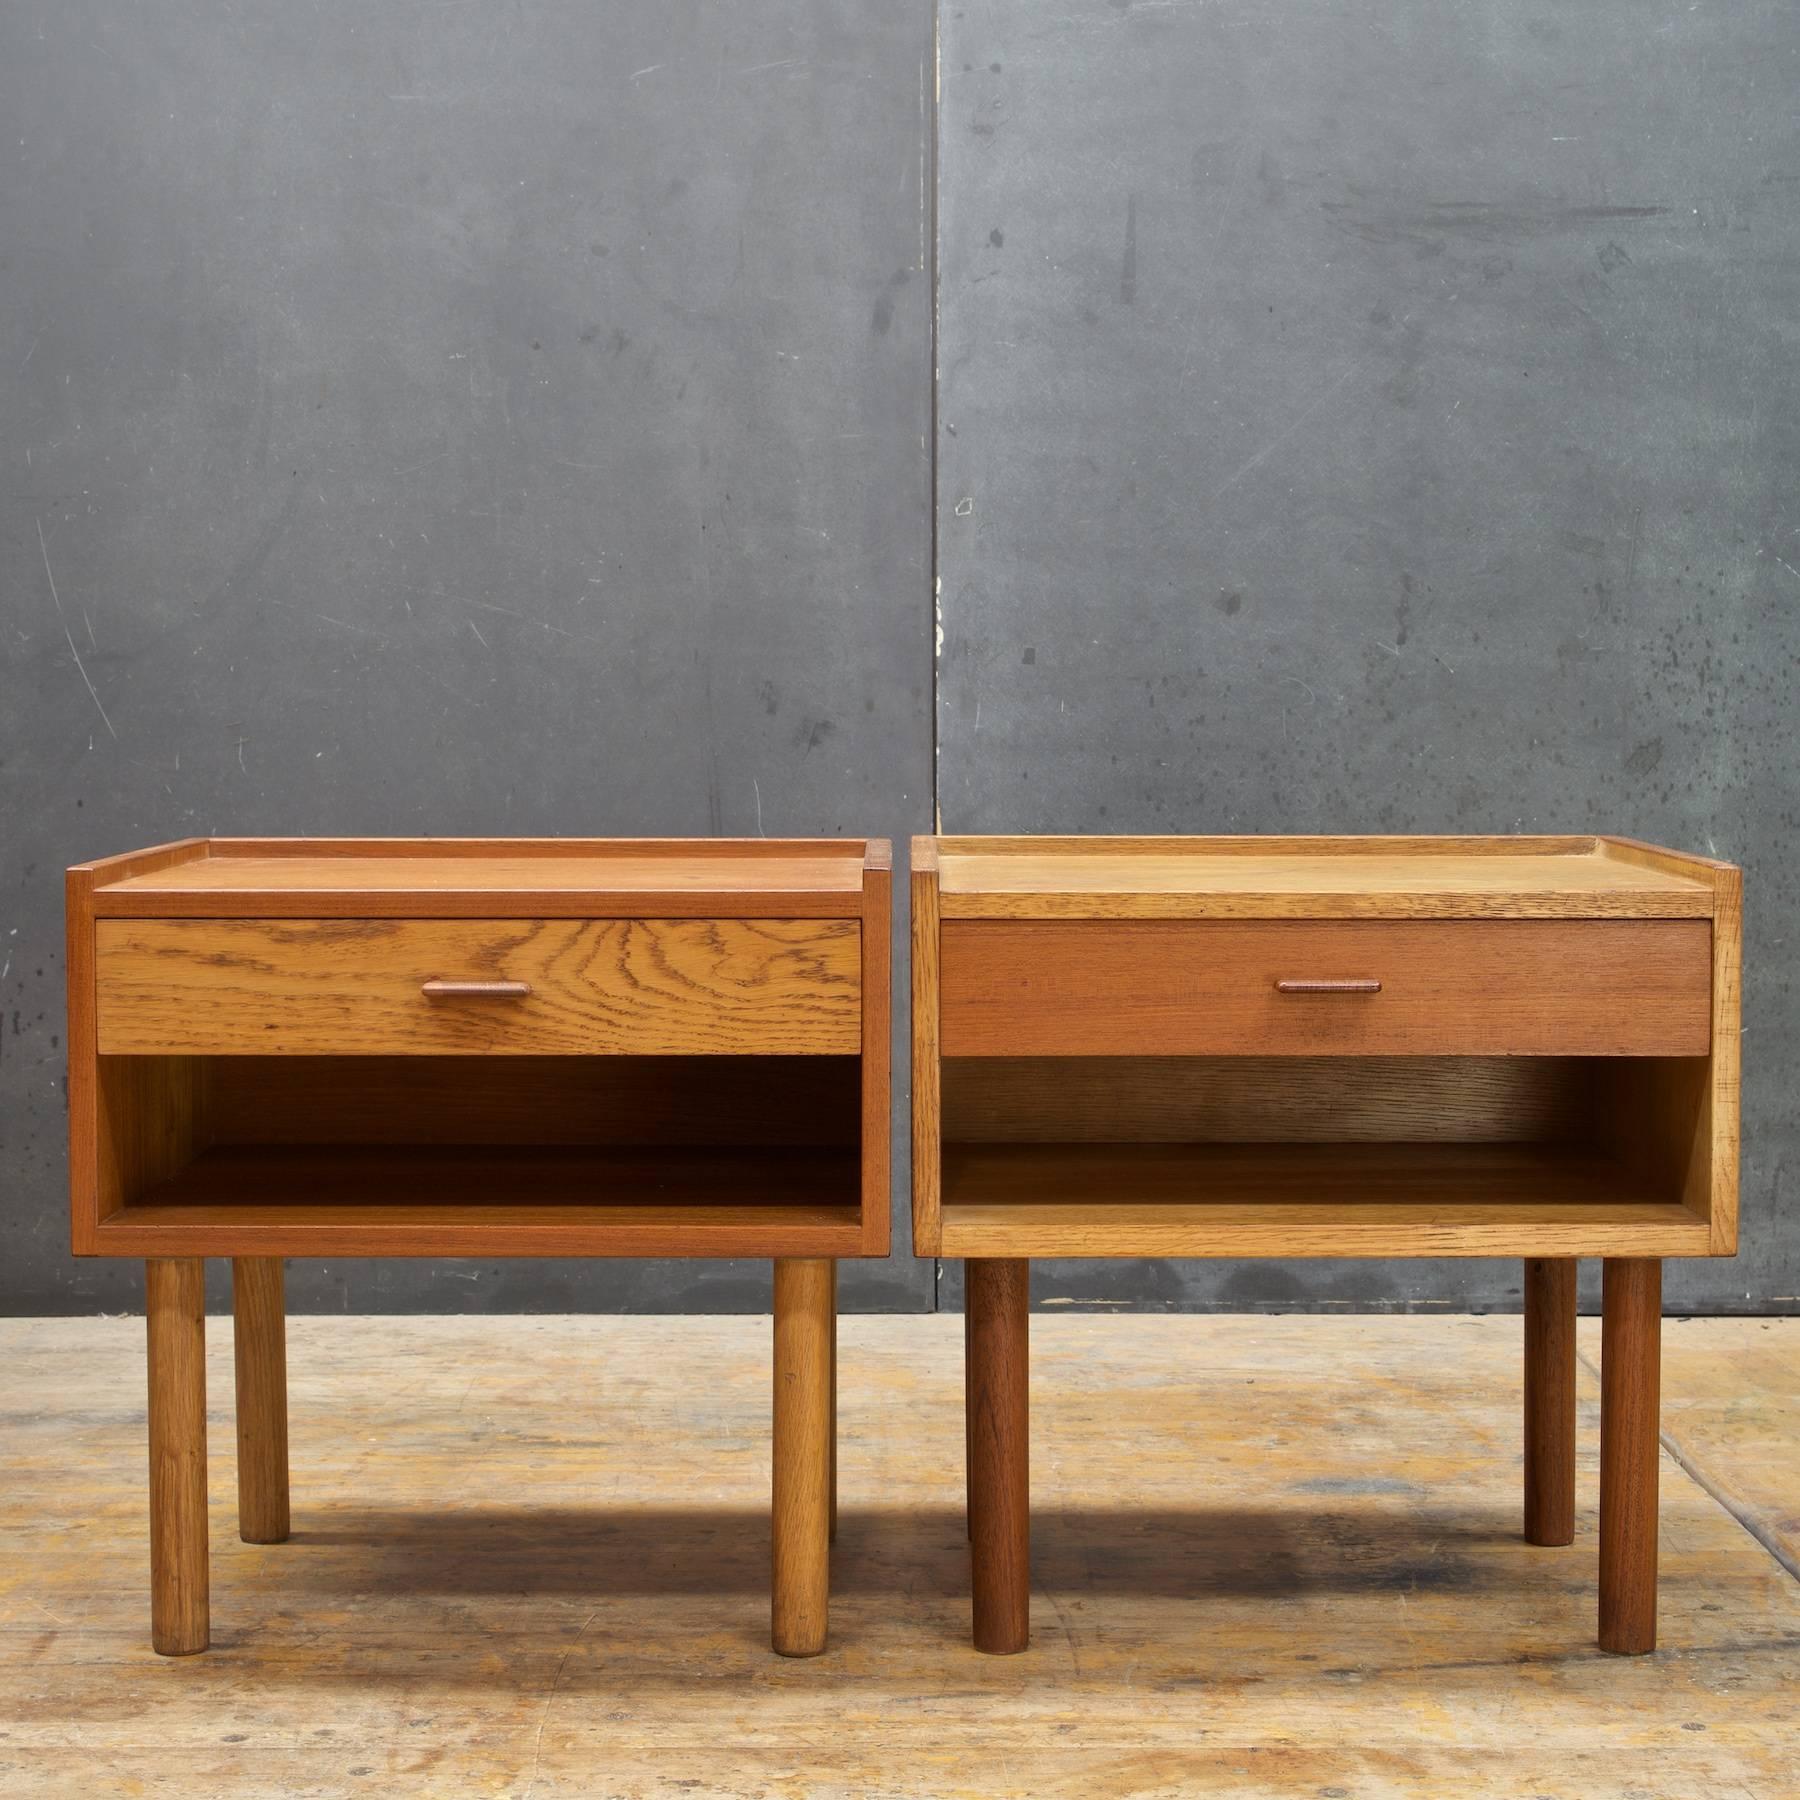 Wonderful pair of teak and oak bedside table with cubby and single drawer designed by Hans J. Wegner for Ry Mobler, Denmark. Cubby height is 3.85 inches.